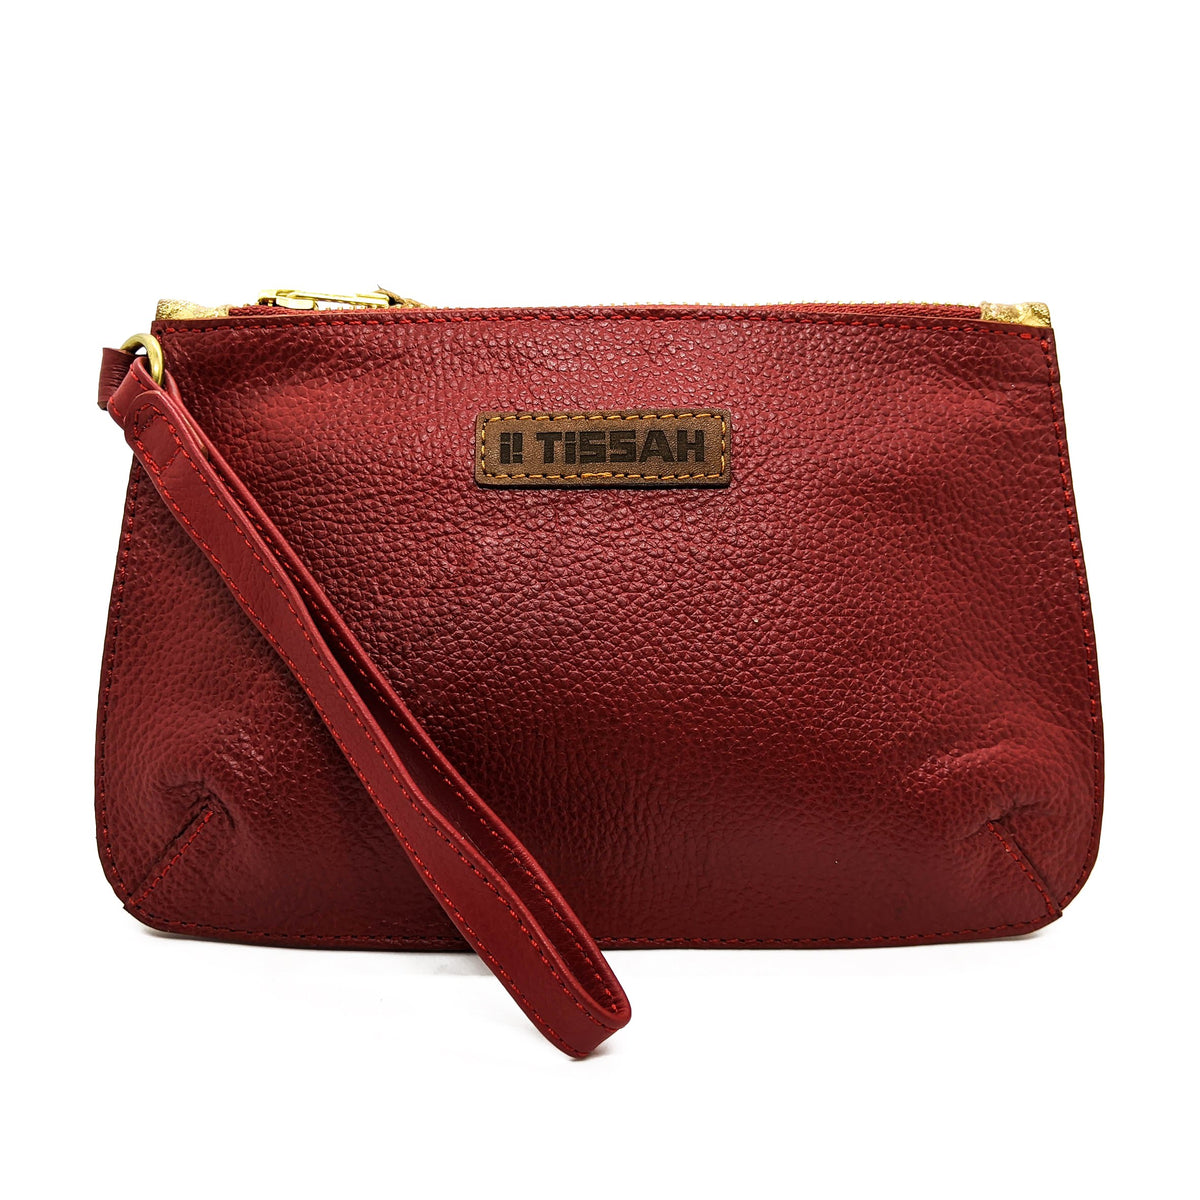 Wristlet - Red with Gold trimmings